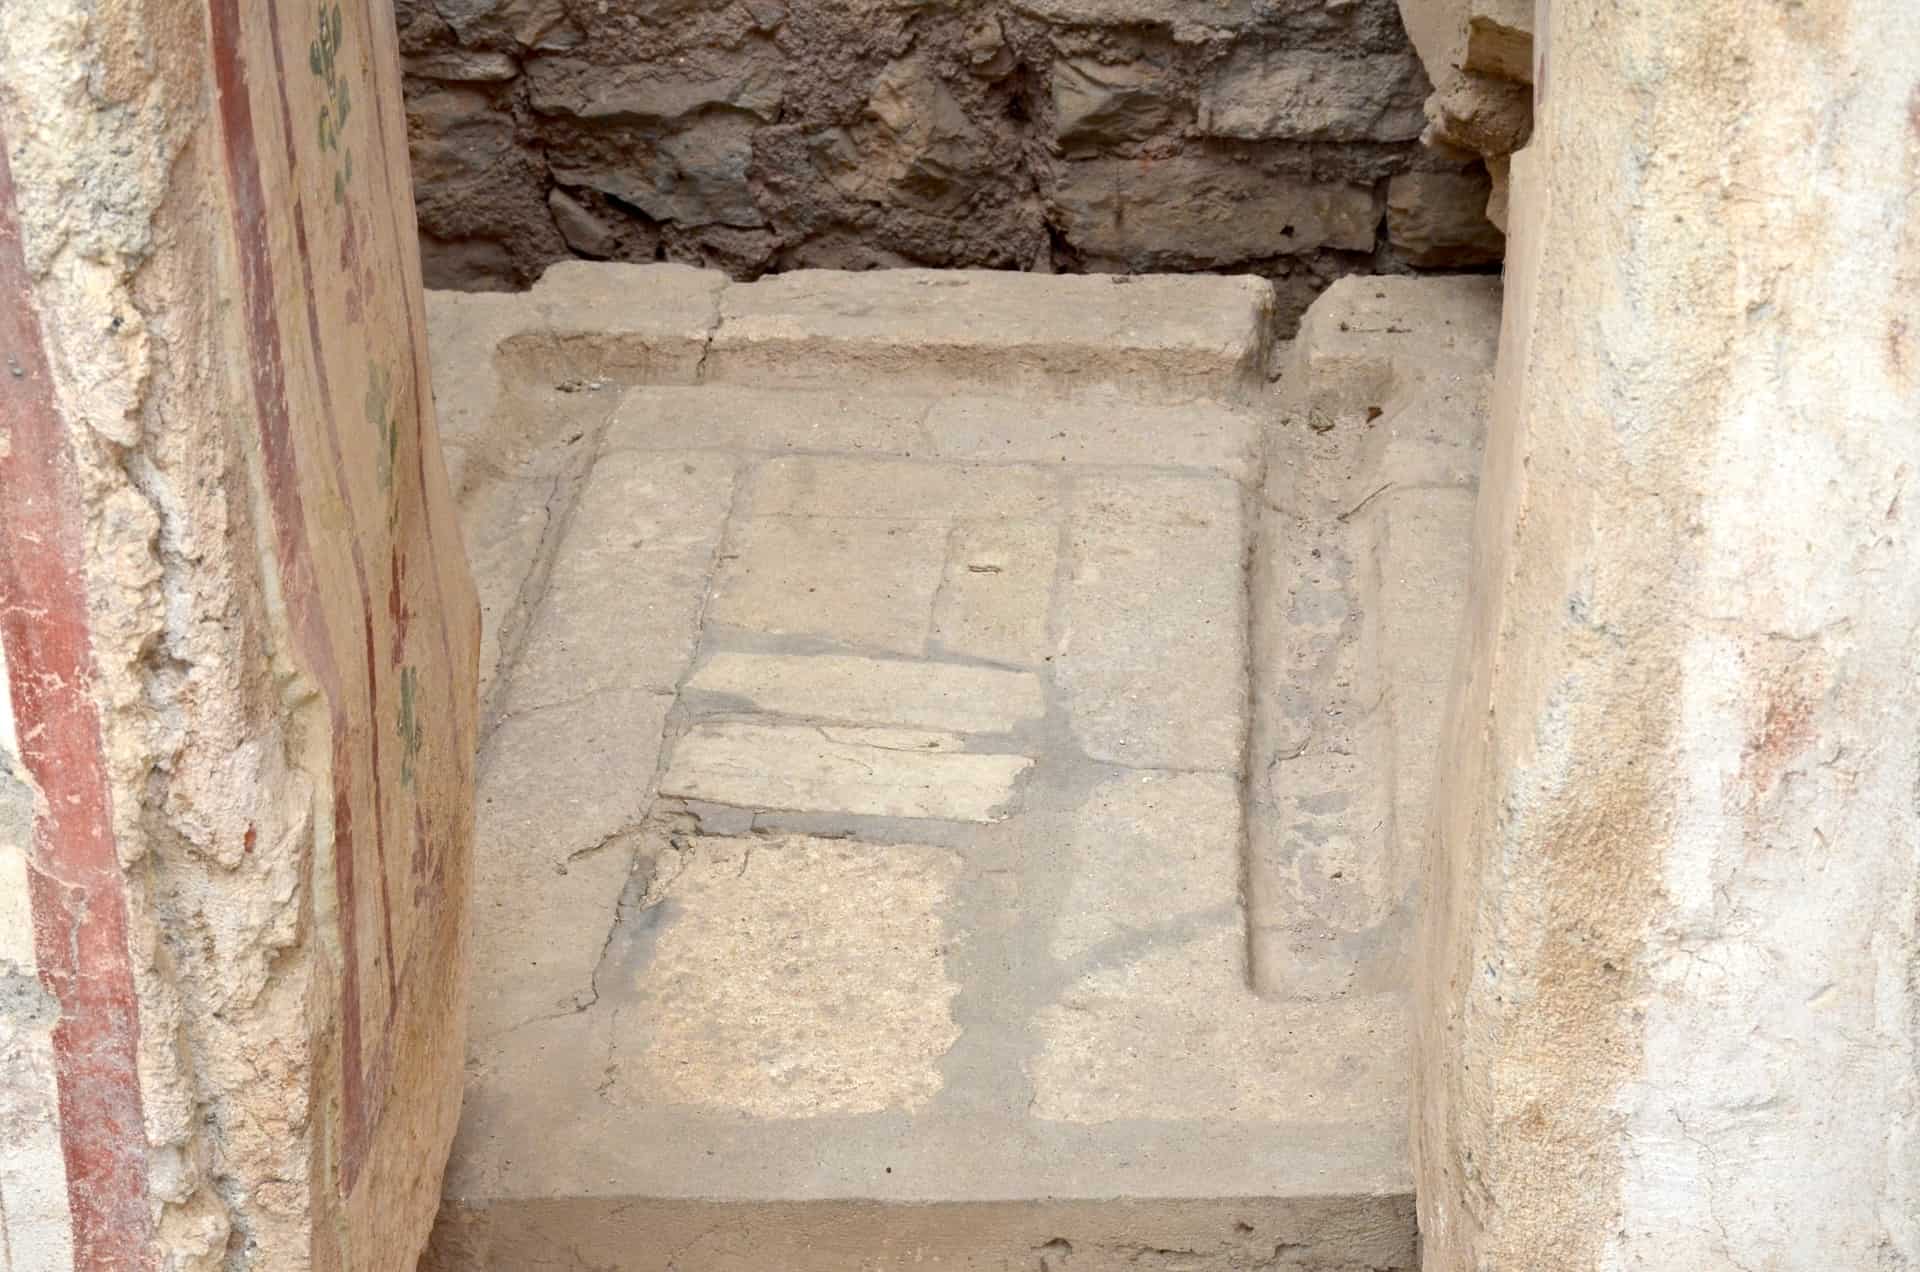 Drainage channels in the latrine in Dwelling Unit 2 in the Terrace Houses at Ephesus